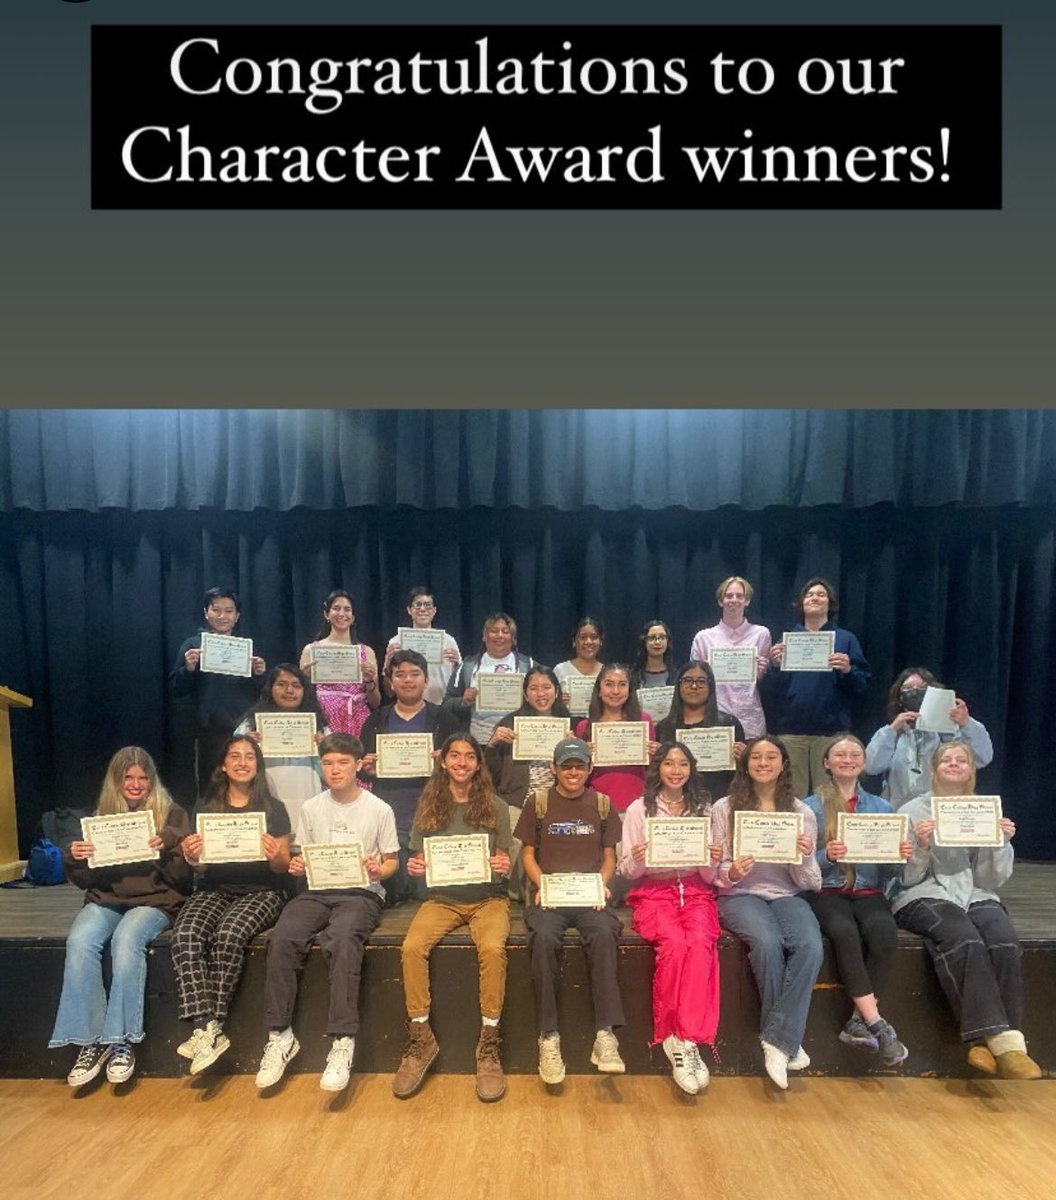 Here are our 24 Champions for Character for 2024! ECHS students in all grade levels who exemplify CARING, CITIZENSHIP, FAIRNESS, RESPECT, RESPONSIBILITY & TRUSTWORTHINESS! #echs #echsptsacm #nmusd #coastlinecollege #charactercounts #costamesa #newportbeach